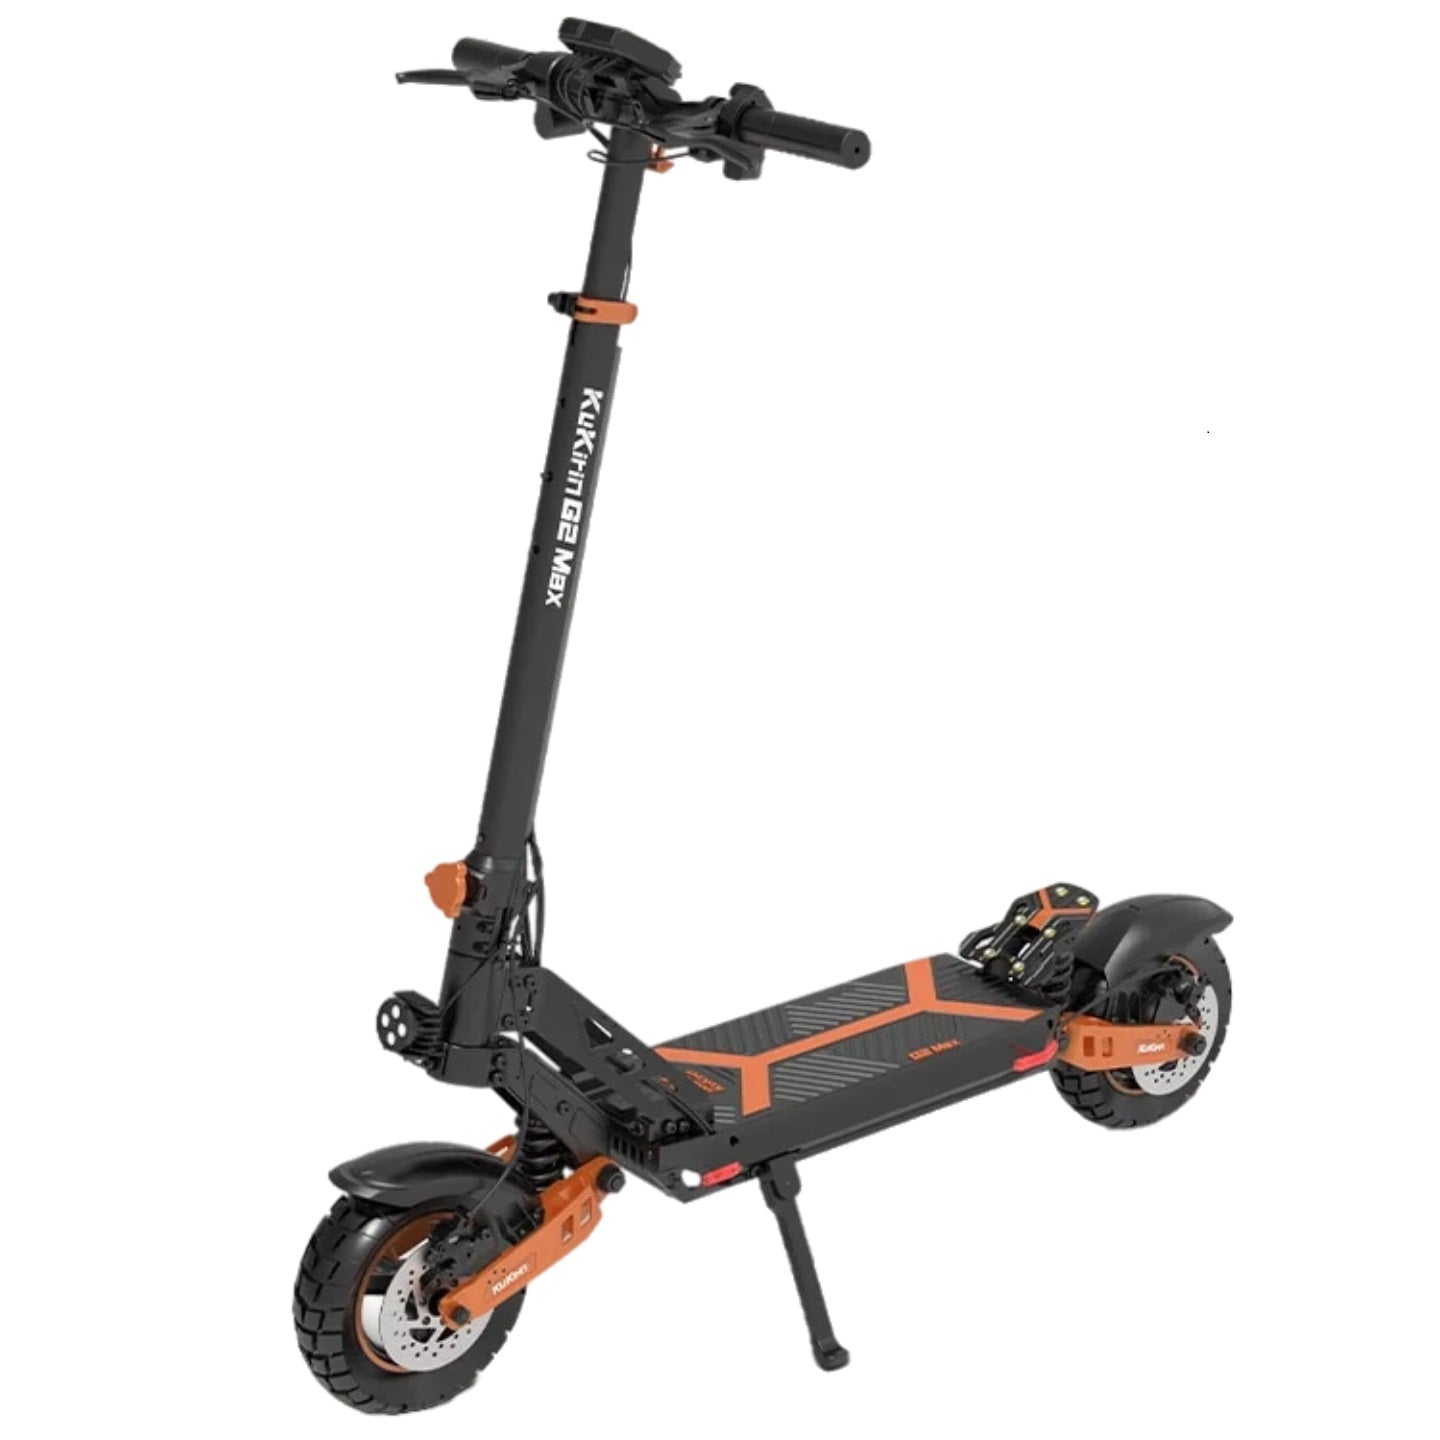 SleekPro™ Electric Scooter - iSmart Home Gadgets Limited